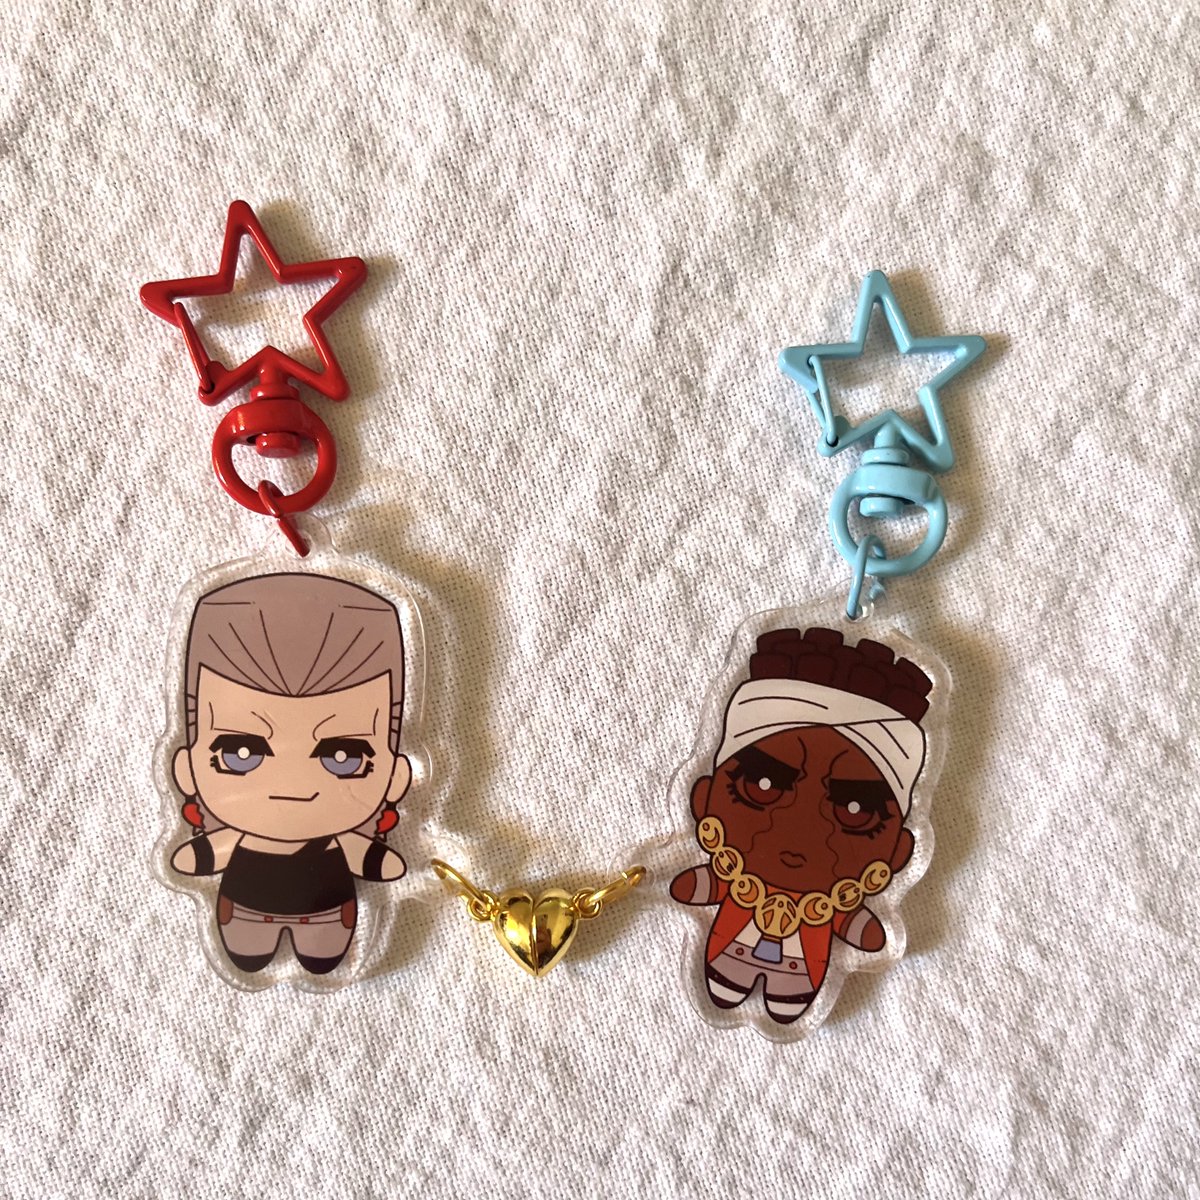 I got my avpol besties (not because I wanted it no sir) and AHHHHHHHHHHHHHHHHHHHHHHHHHHHH THEY ARE SO CUTE IM GONNA CRYY 🥺 I’m really happy how it came out like Avdol and Polnareff are just the silliest 😭😭